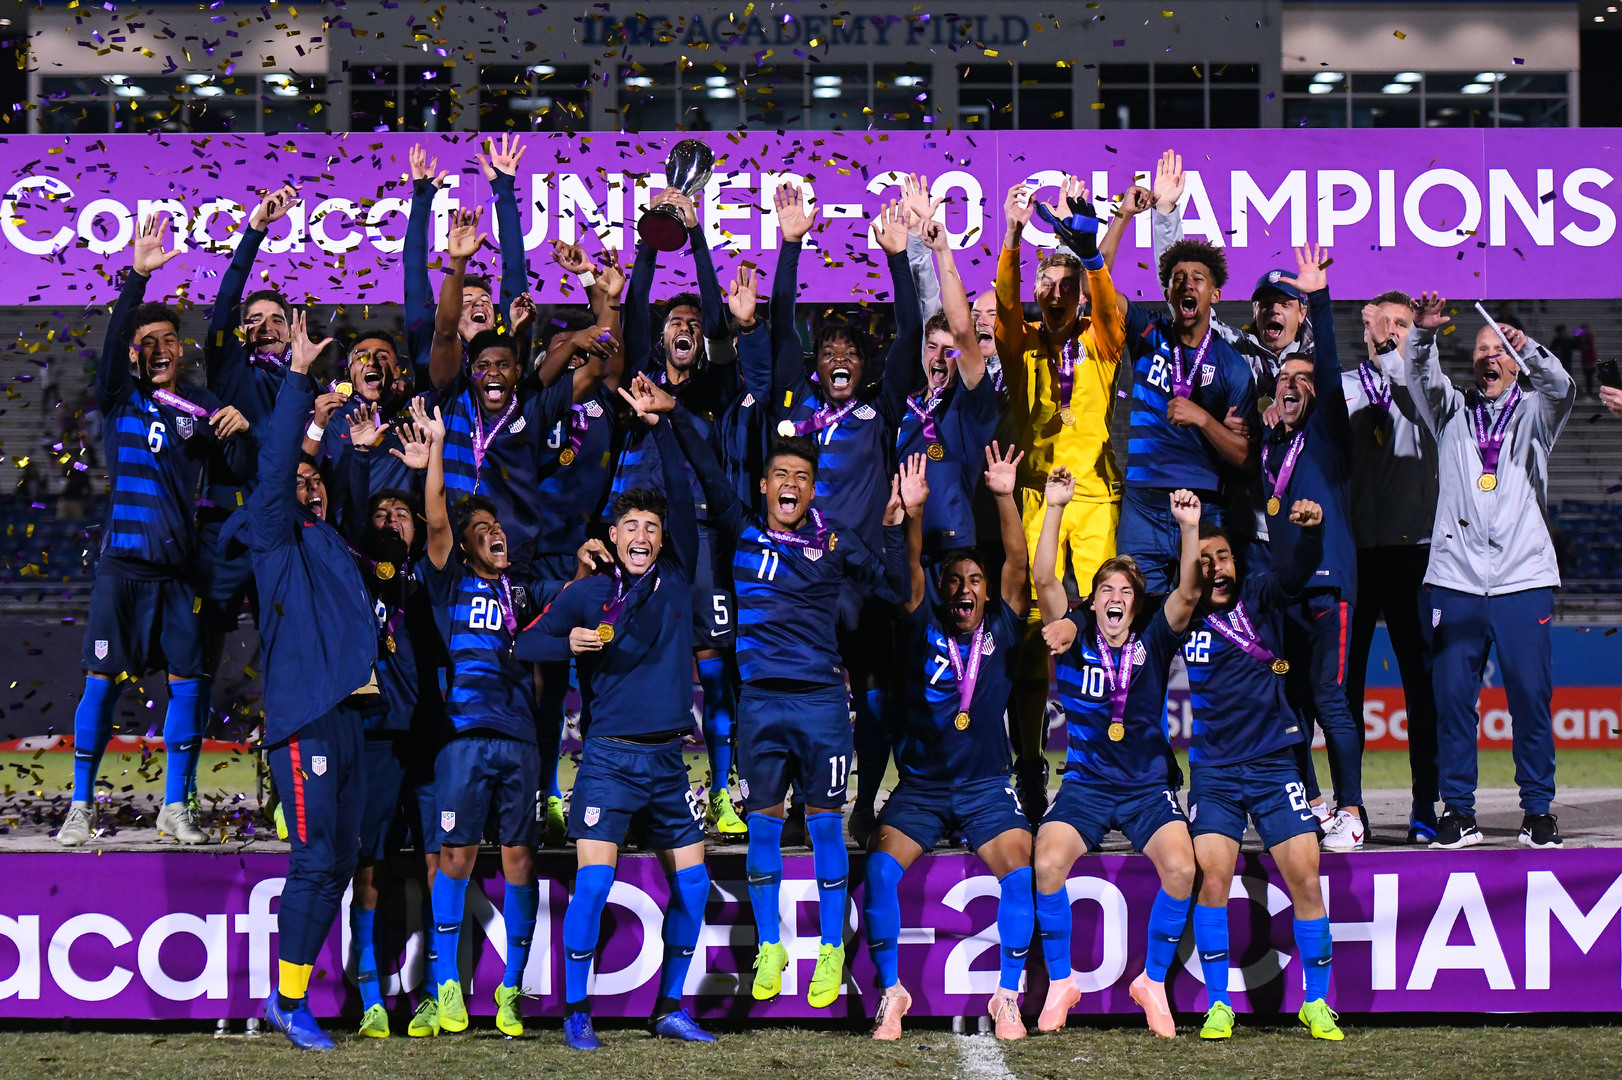 2018 Concacaf Men's Under-20 Champions, USA lifts the trophy